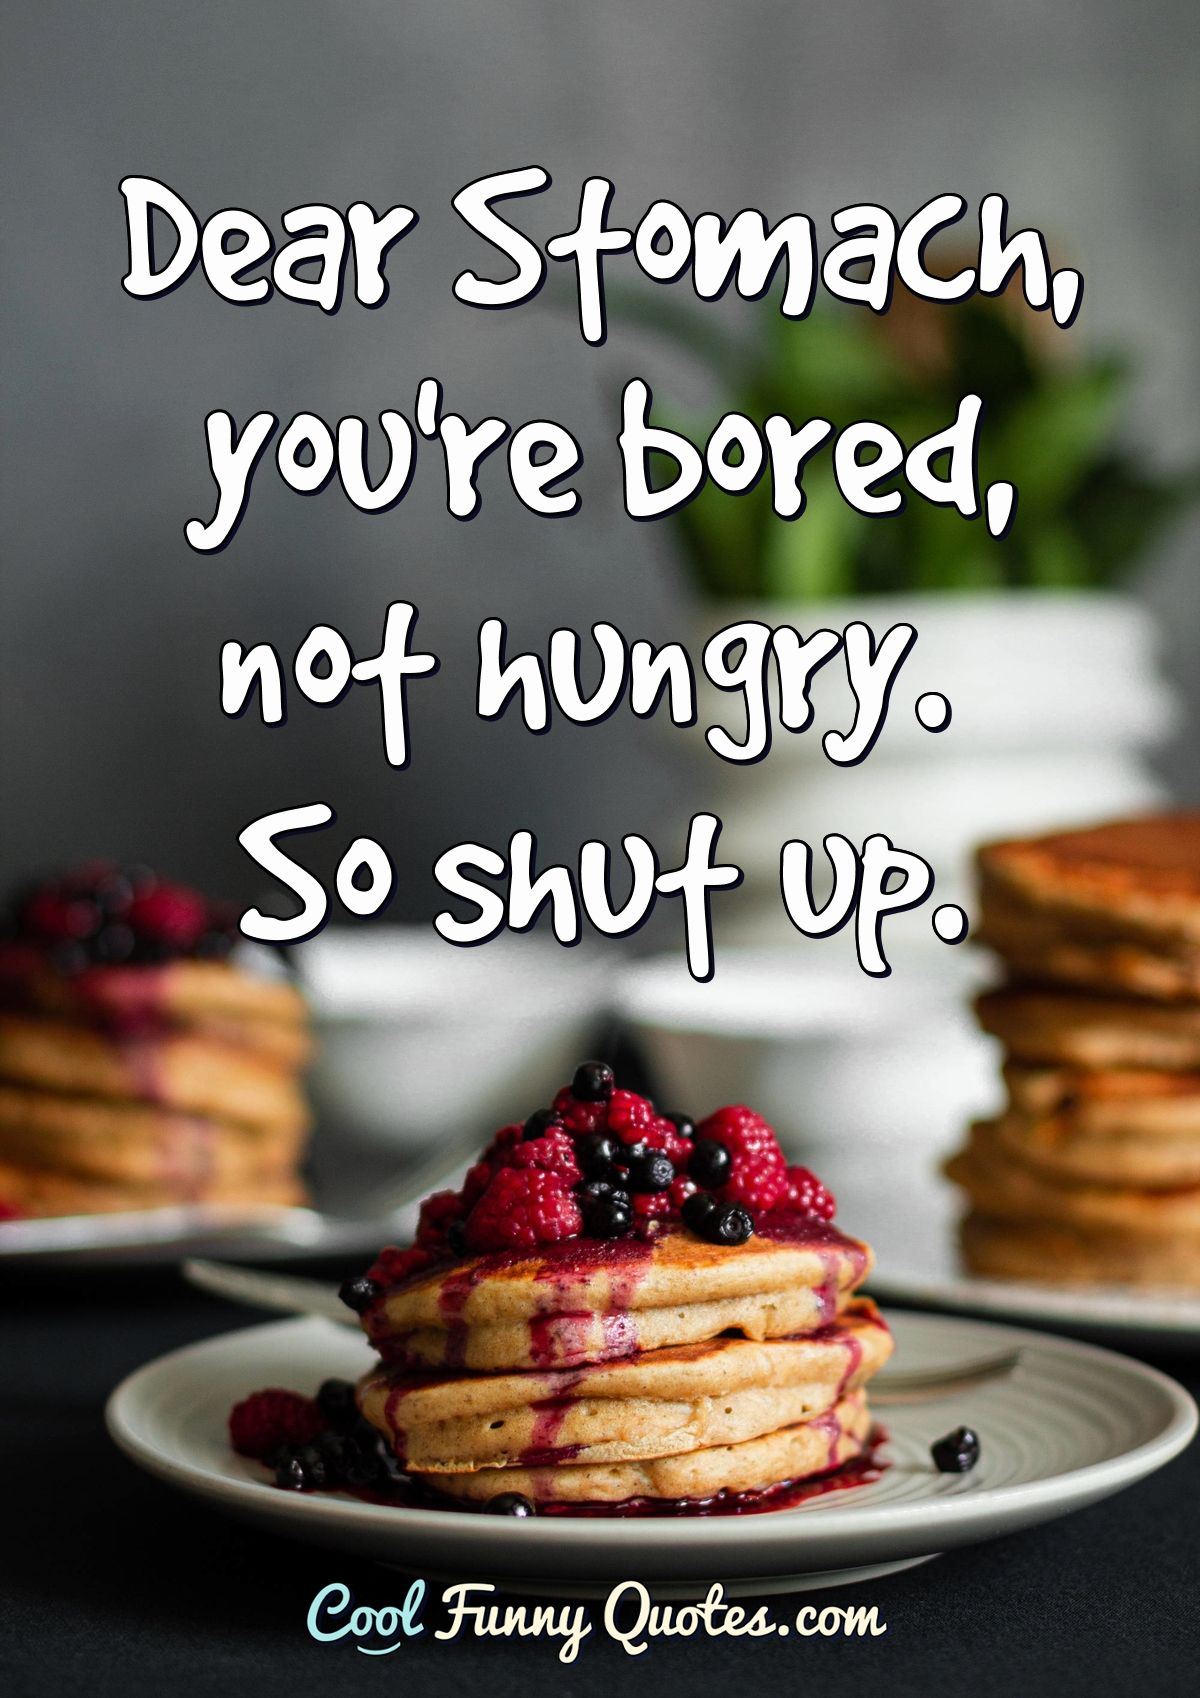 Dear Stomach, you're bored, not hungry. So shut up.